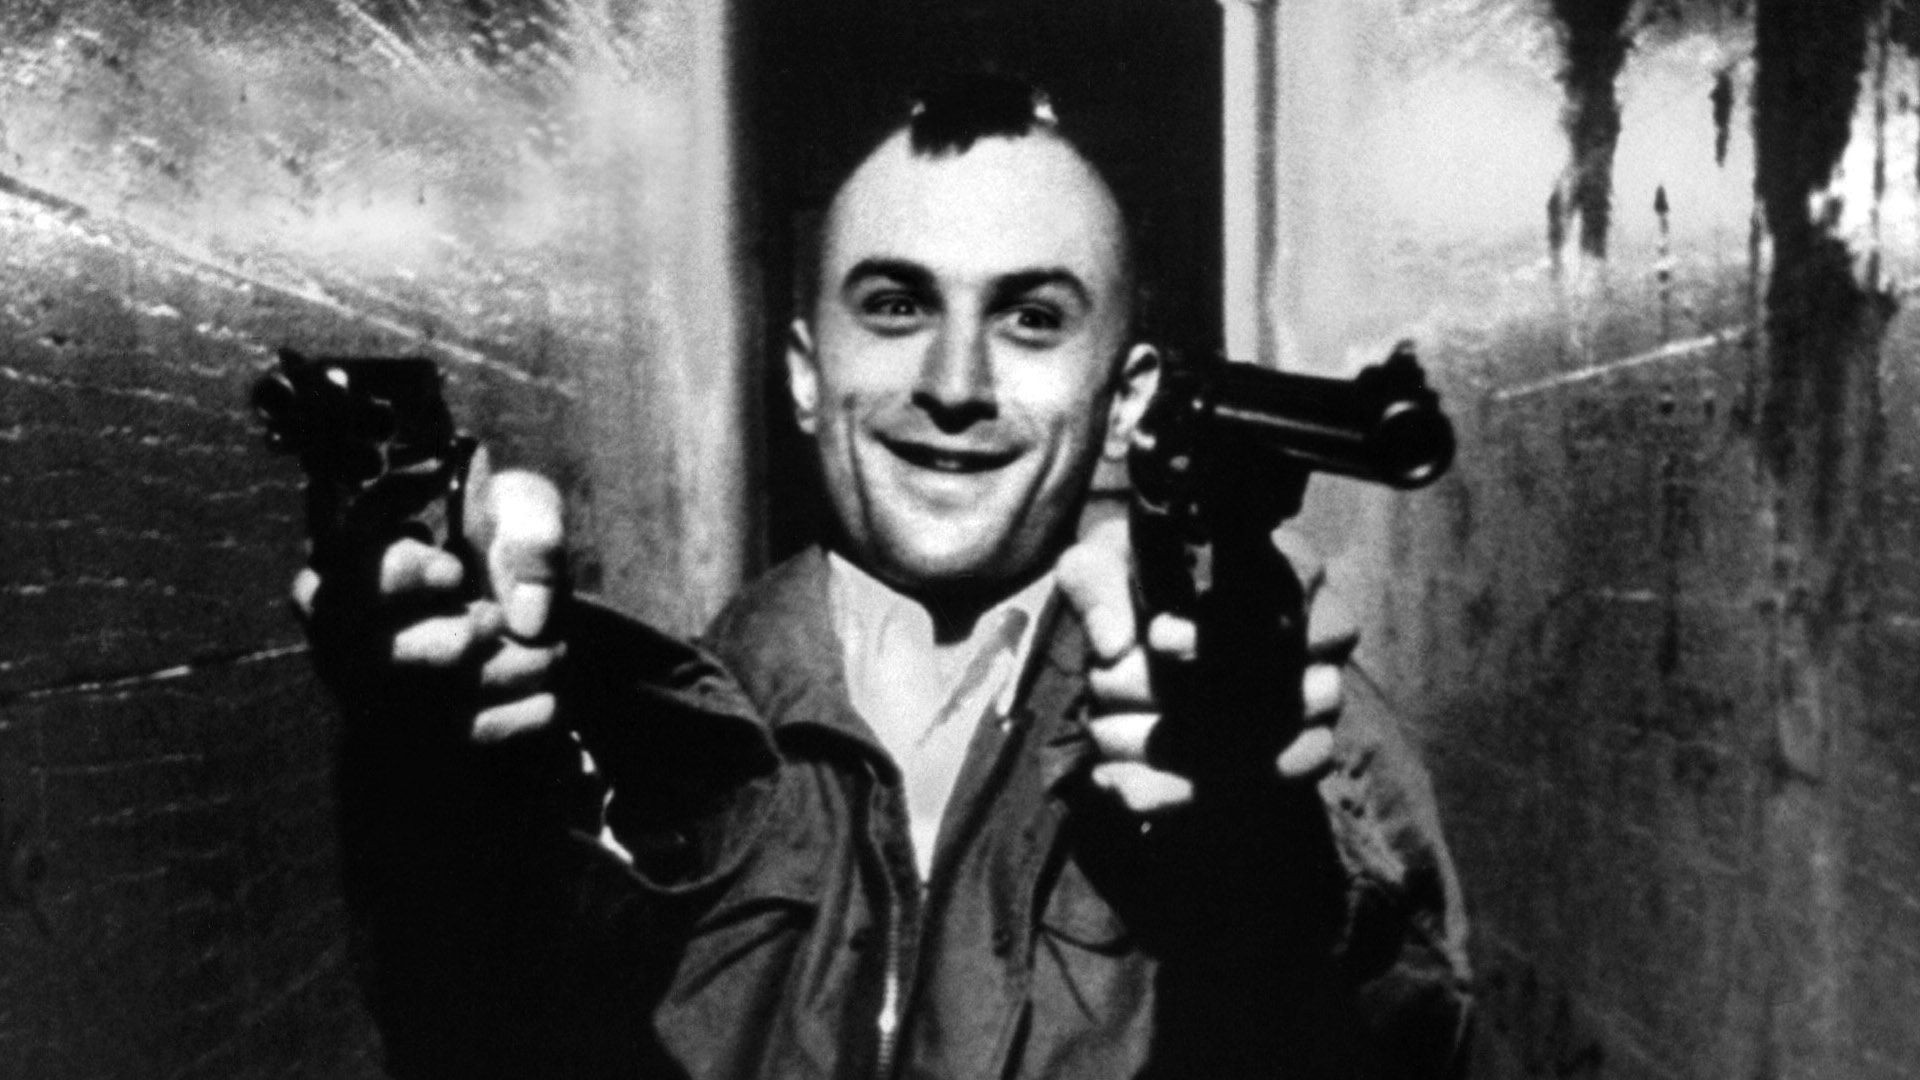 People 1920x1080 movies Robert de Niro monochrome weapon revolver Taxi Driver smiling gun scary face mohawk frontal view film stills men actor celebrity aiming dual wield